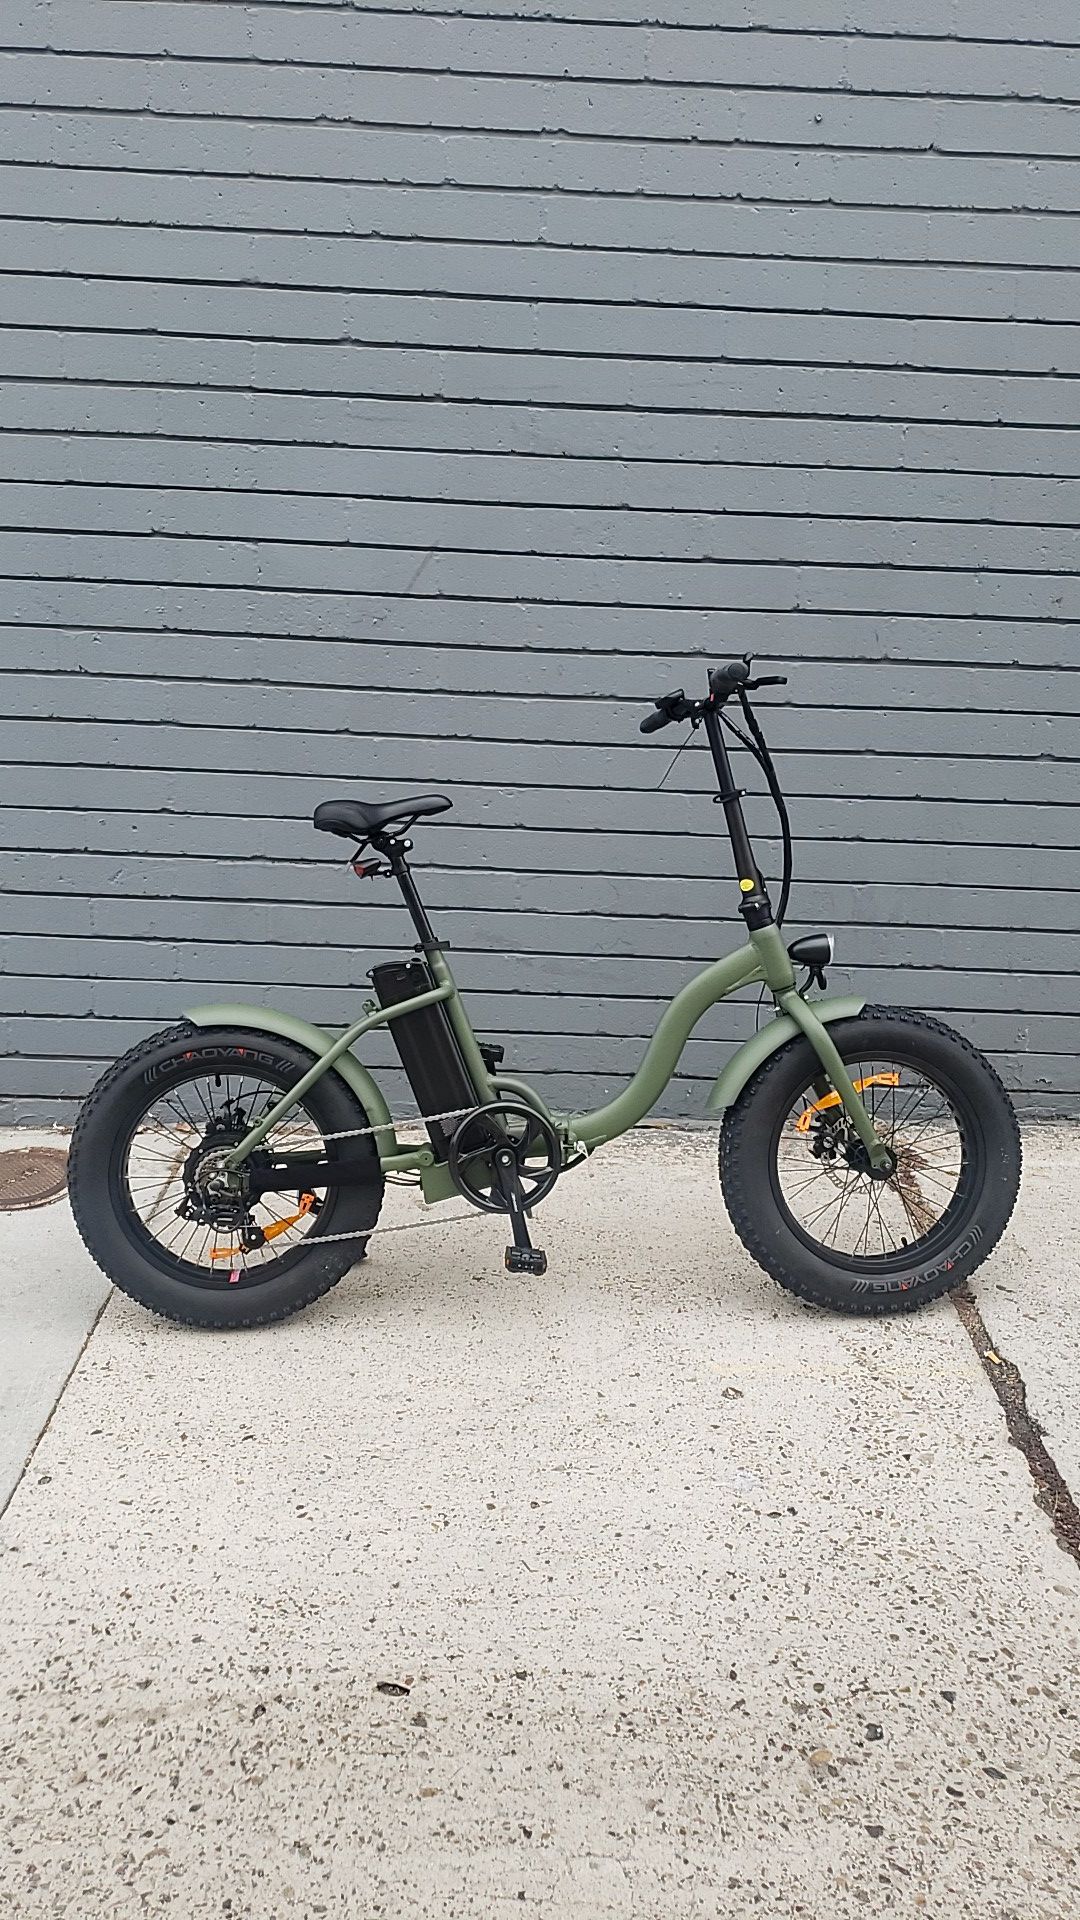 NEW Foldable Electric Bicycle "TJC" 48V 500W